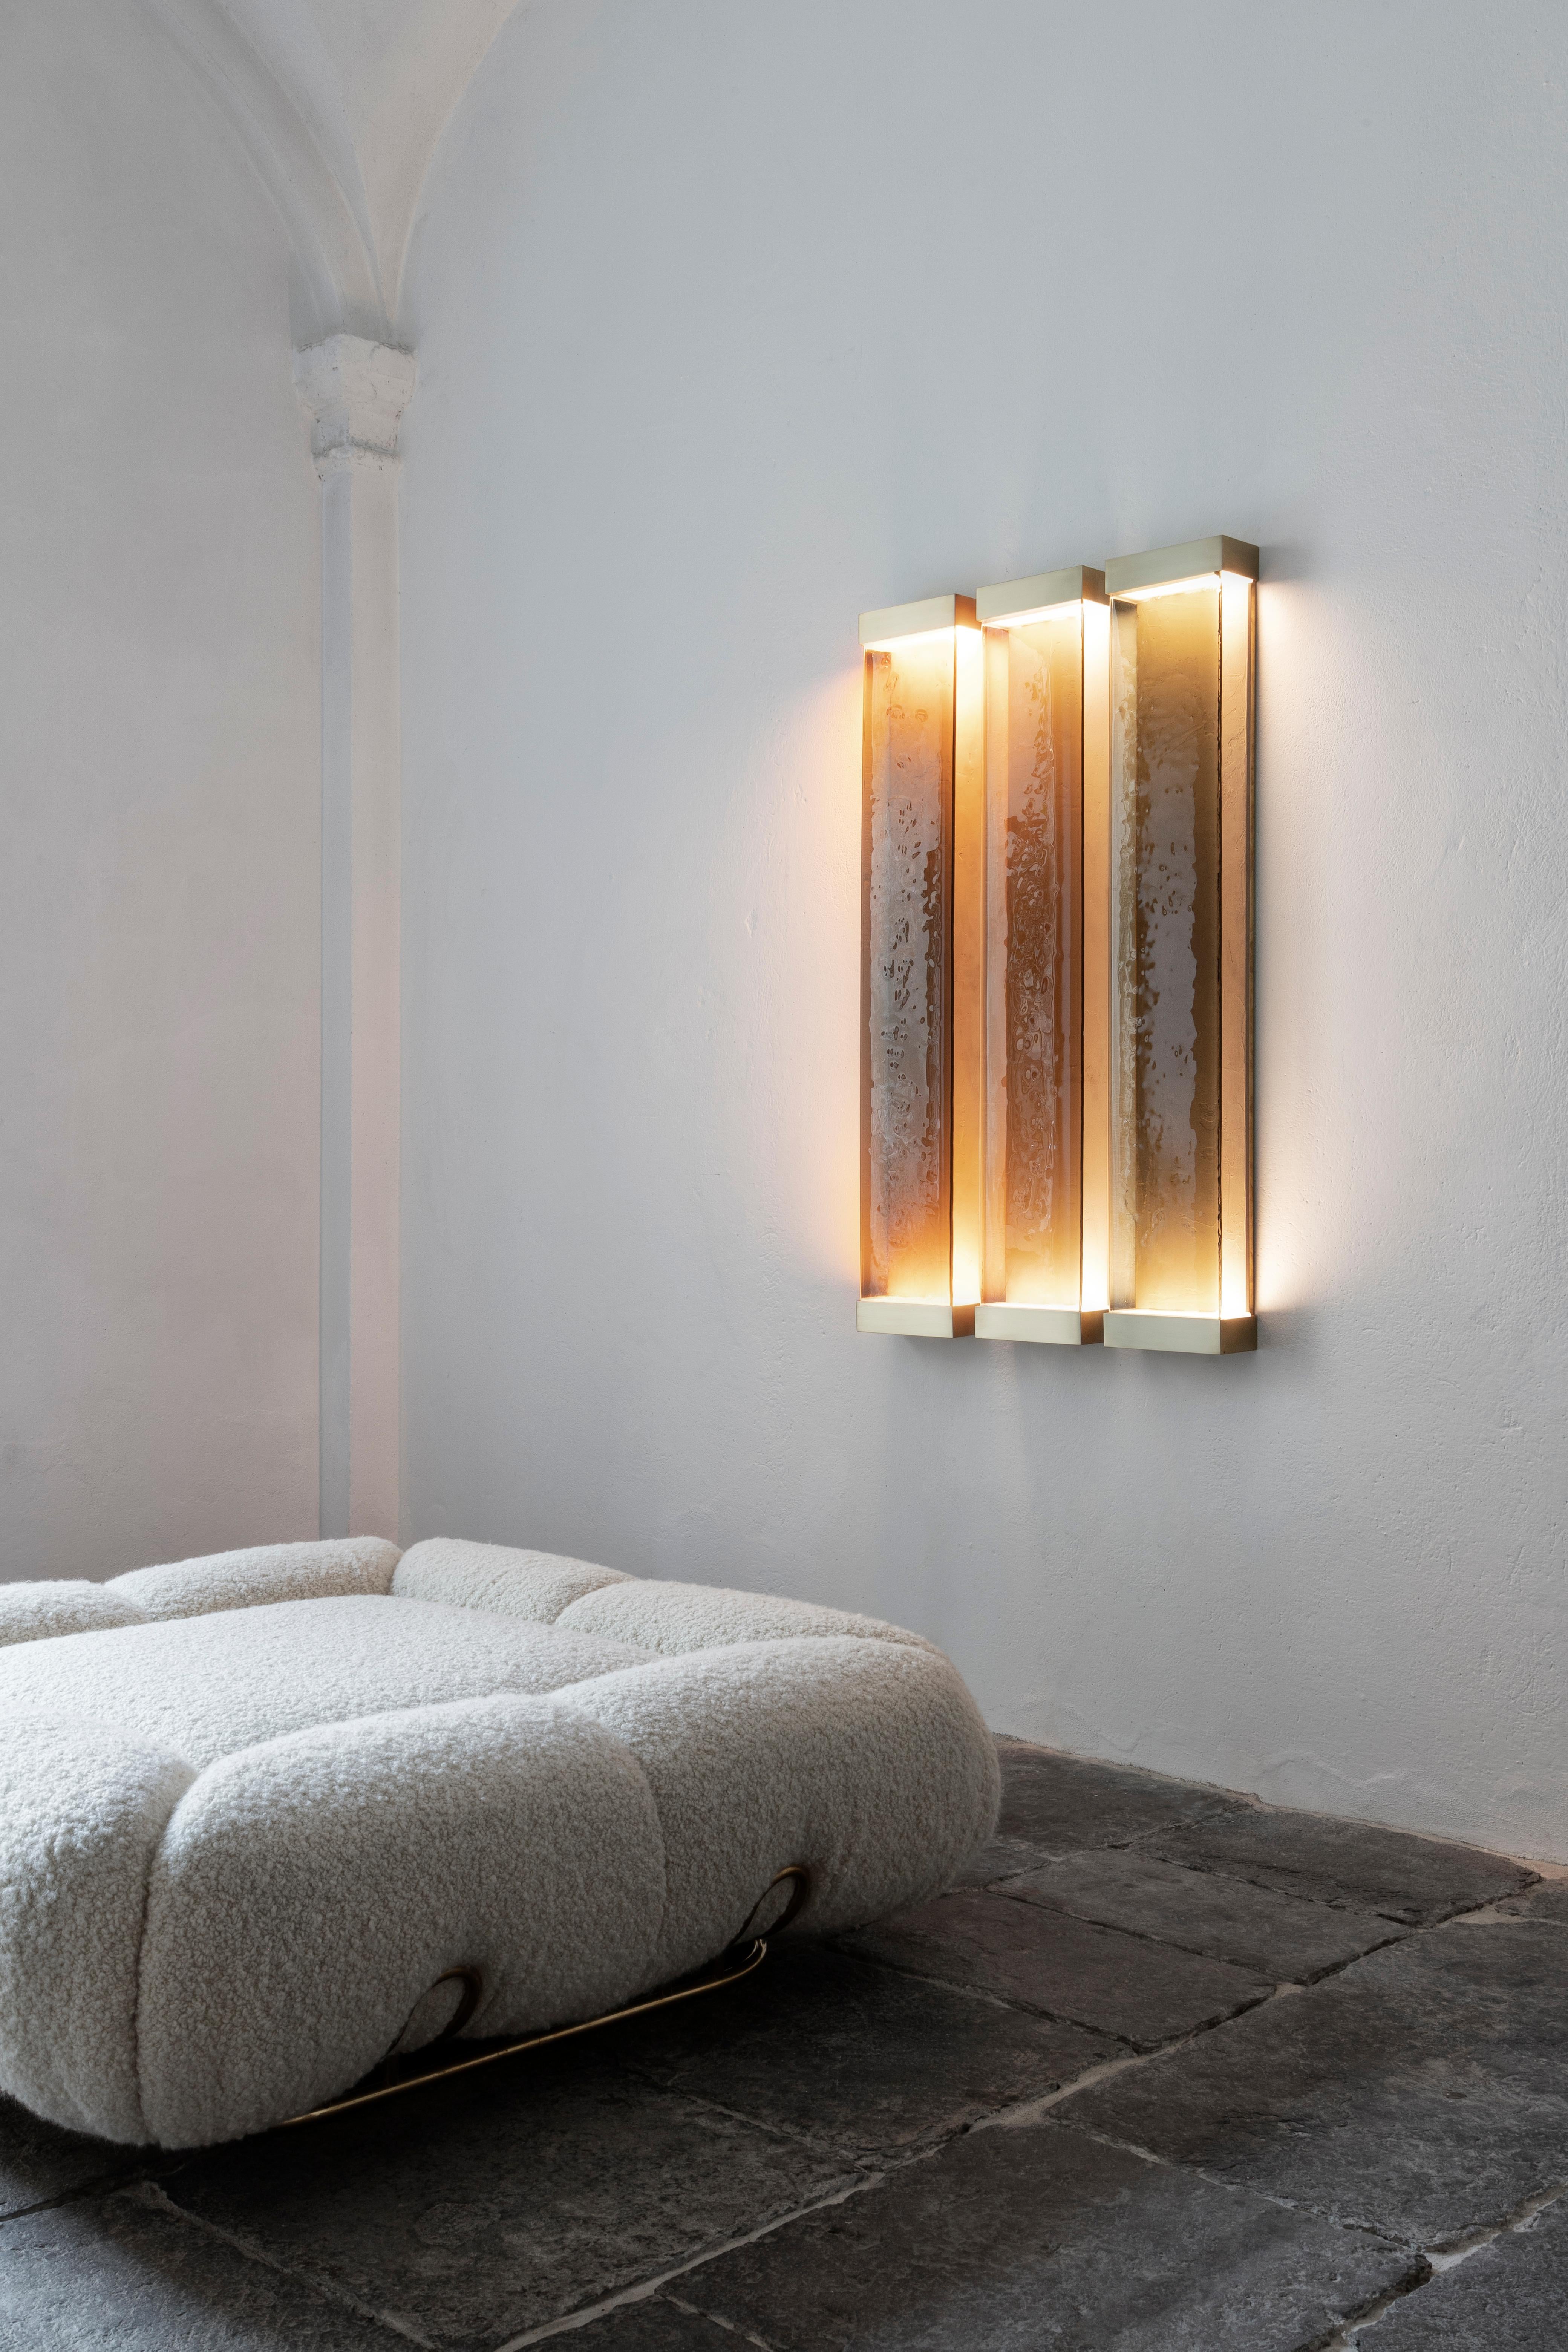 Drawing inspiration from minimalism, Jud lamps pay tribute to artist Donald Judd. The various shades of translucent glass and resin filters have been melded together to create a cohesive and balanced color scheme. Each piece consists of a brass